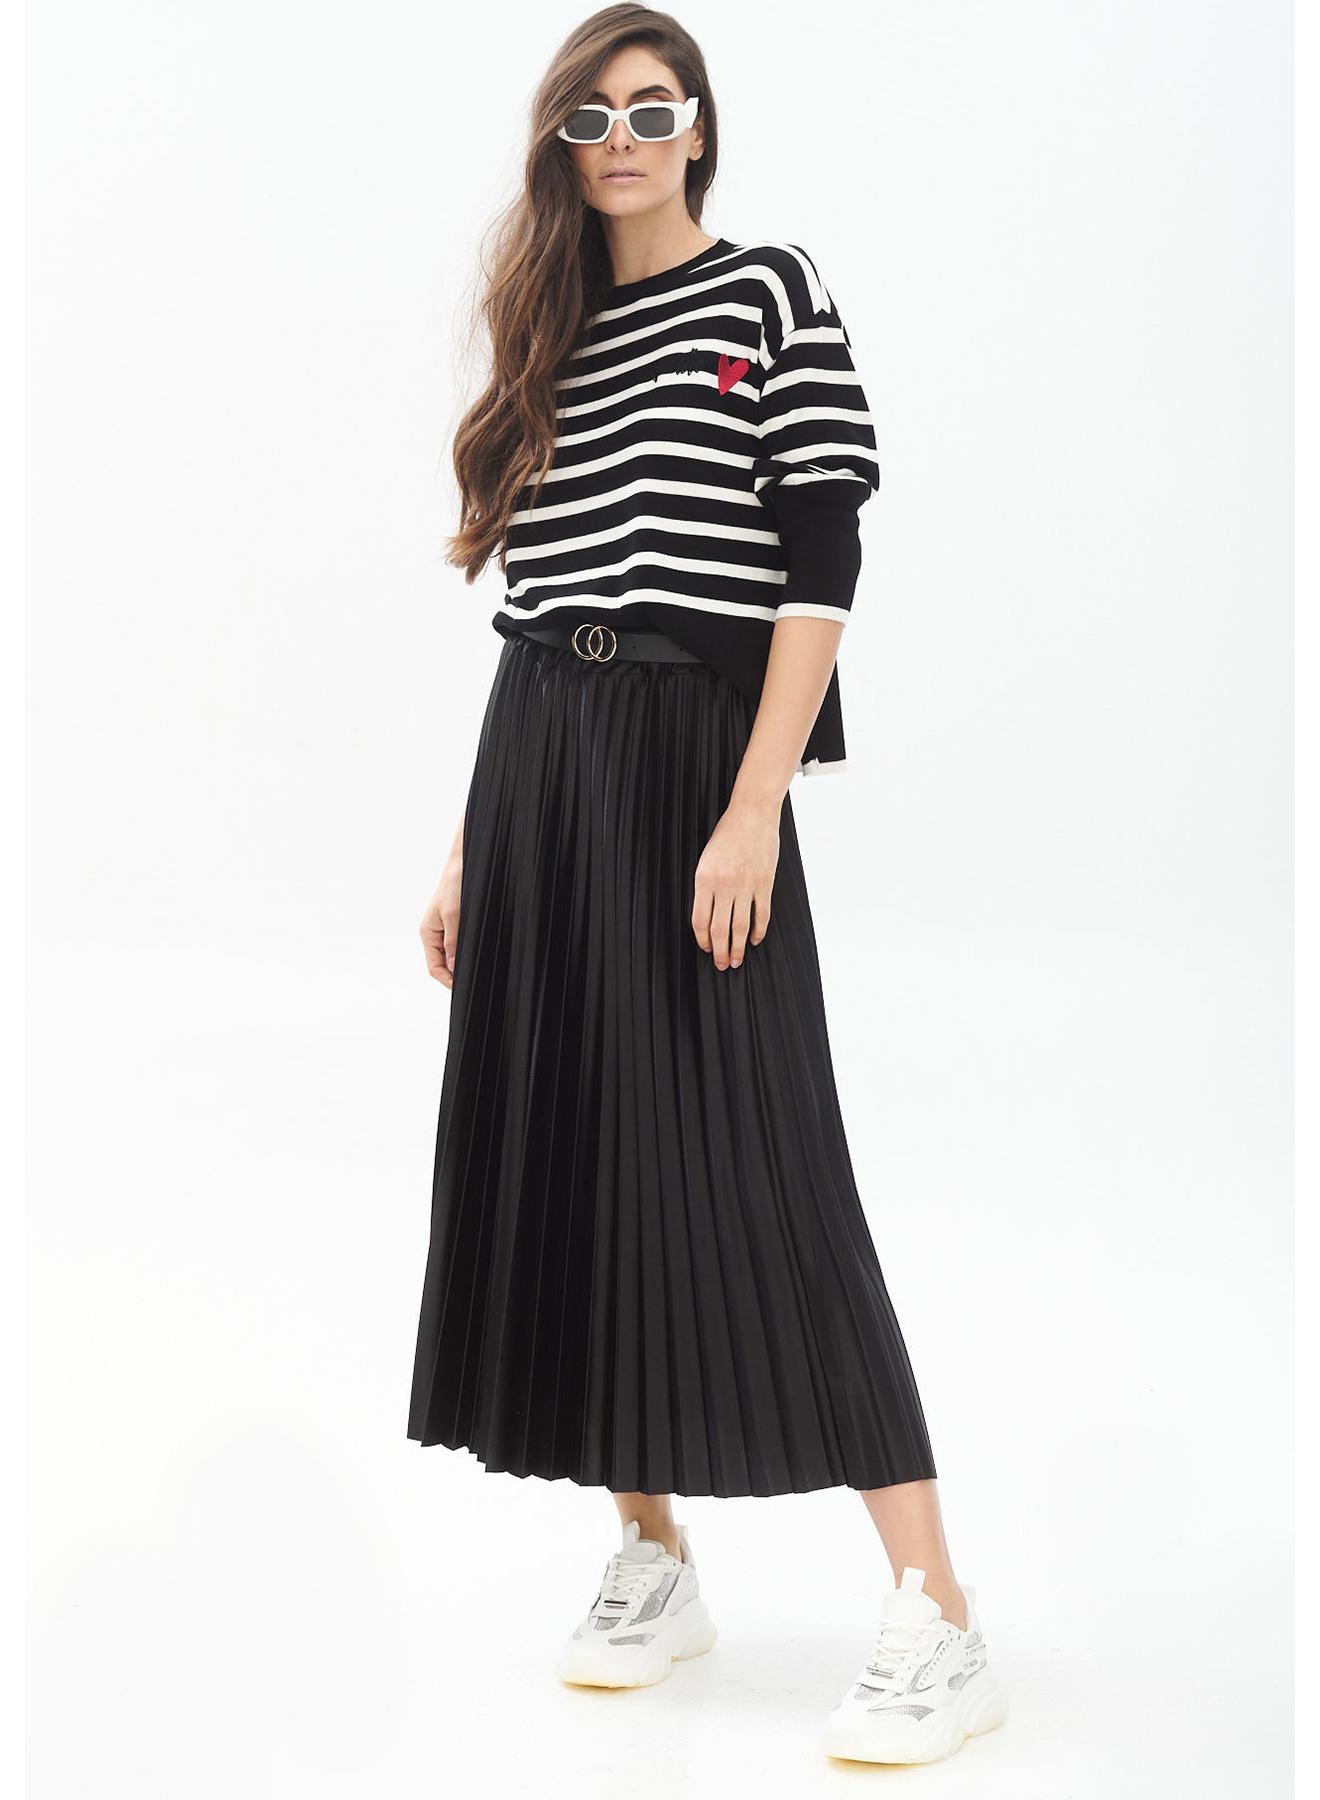 Pleated silky touch skirt with belt - 2